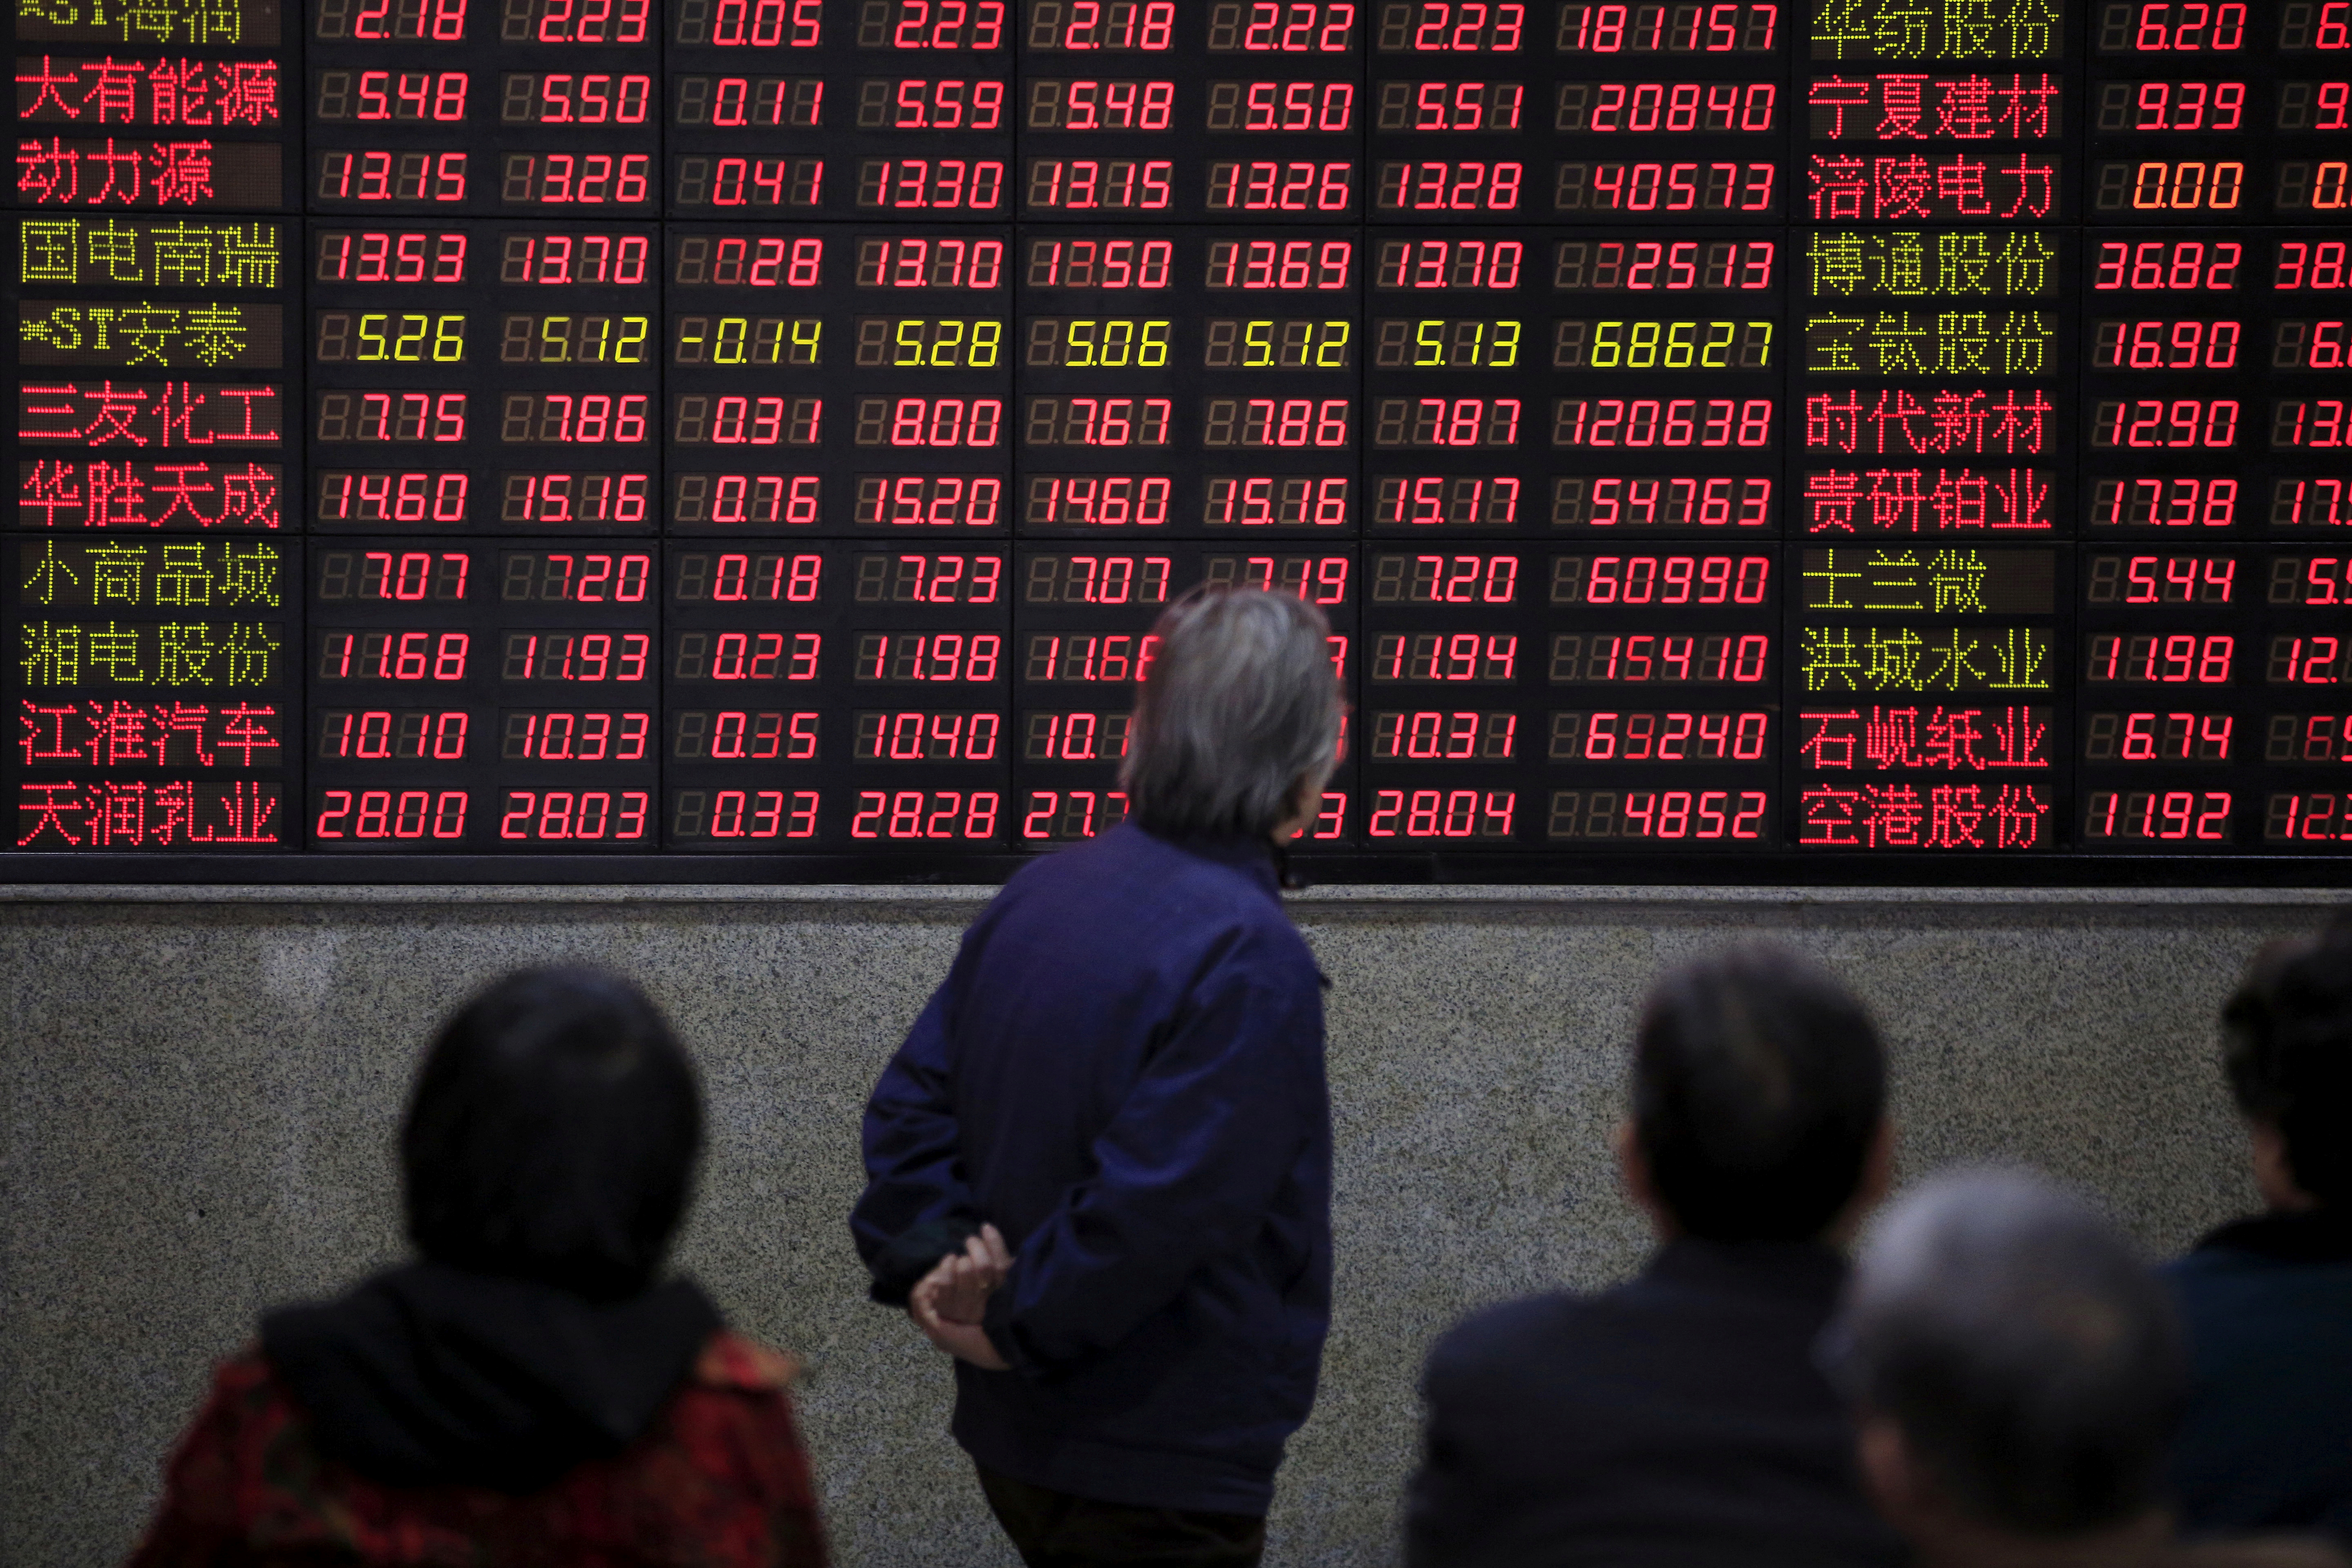 Investors look at an electronic board showing stock information at a brokerage house in Shanghai, China, March 7, 2016. REUTERS/Aly Song